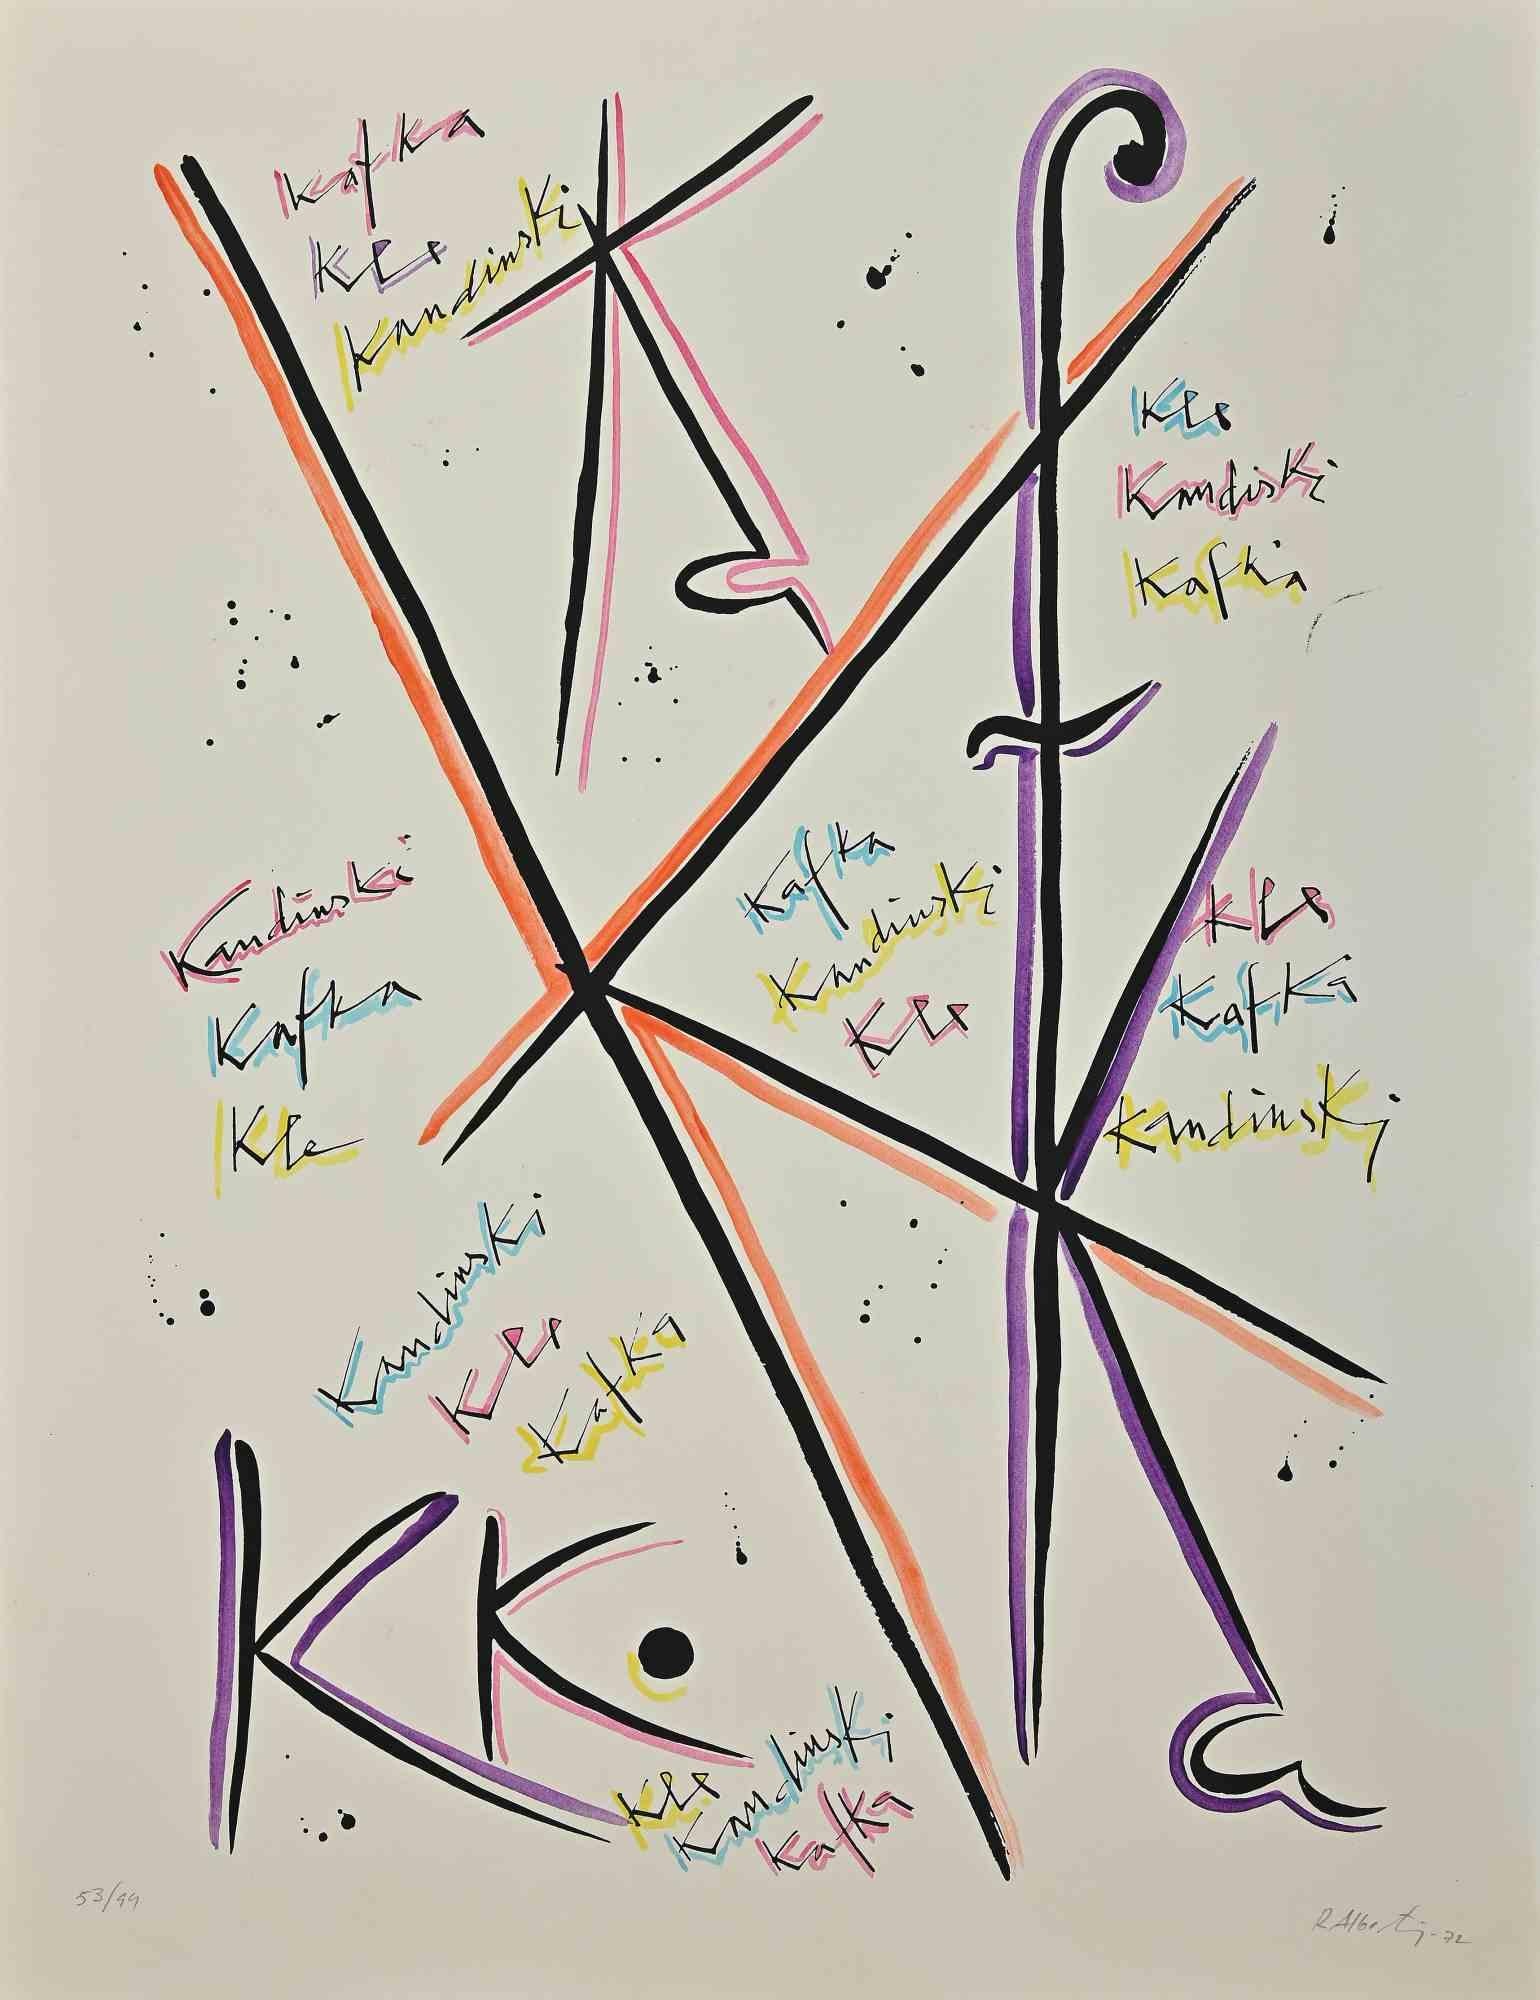 Letter K from the Alphabet series is a lithograph realized by Rafael Alberti in 1972.

Hand-signed on the lower right.

Numbered, edition 53/99.

The state of preservation is good.

The artwork represents the alphabet letter, with a poetical